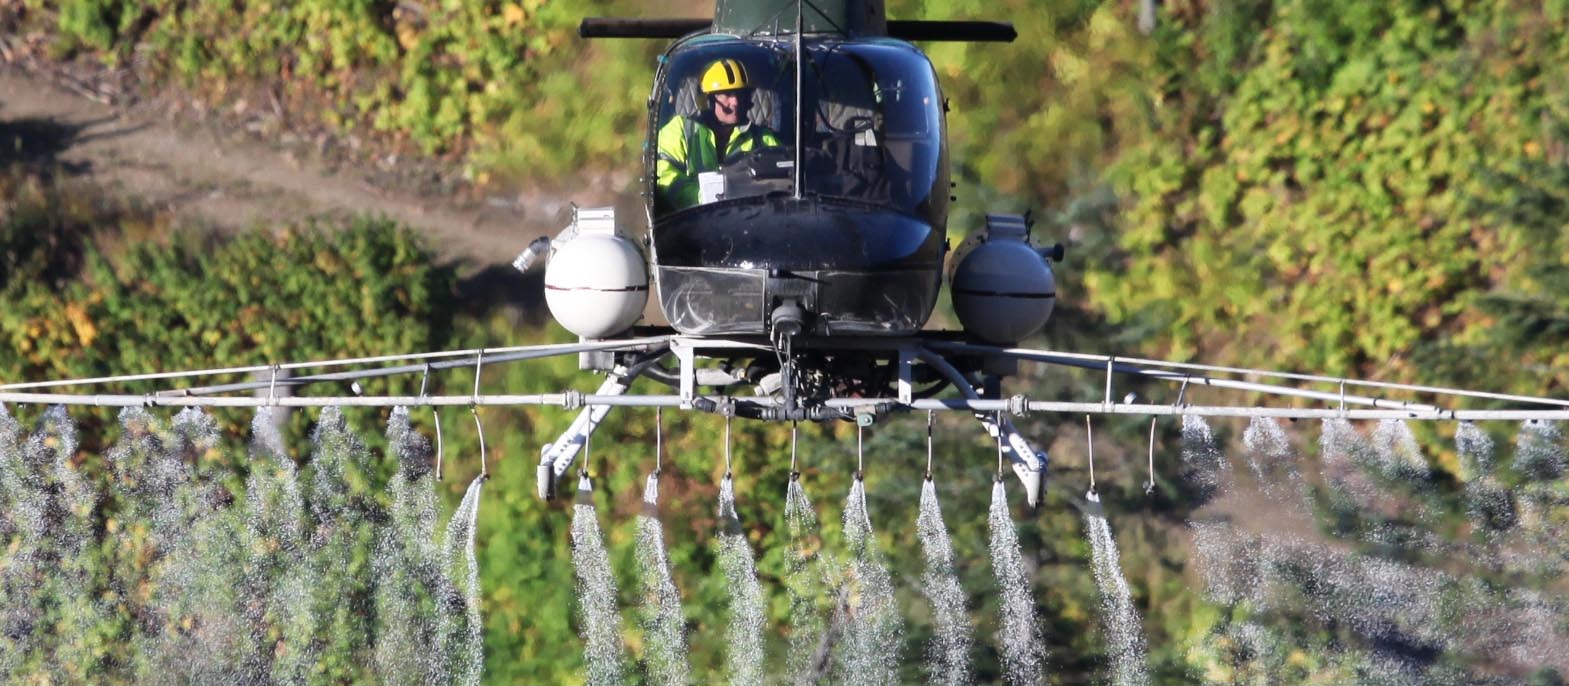 Helicopter flying on herbicides